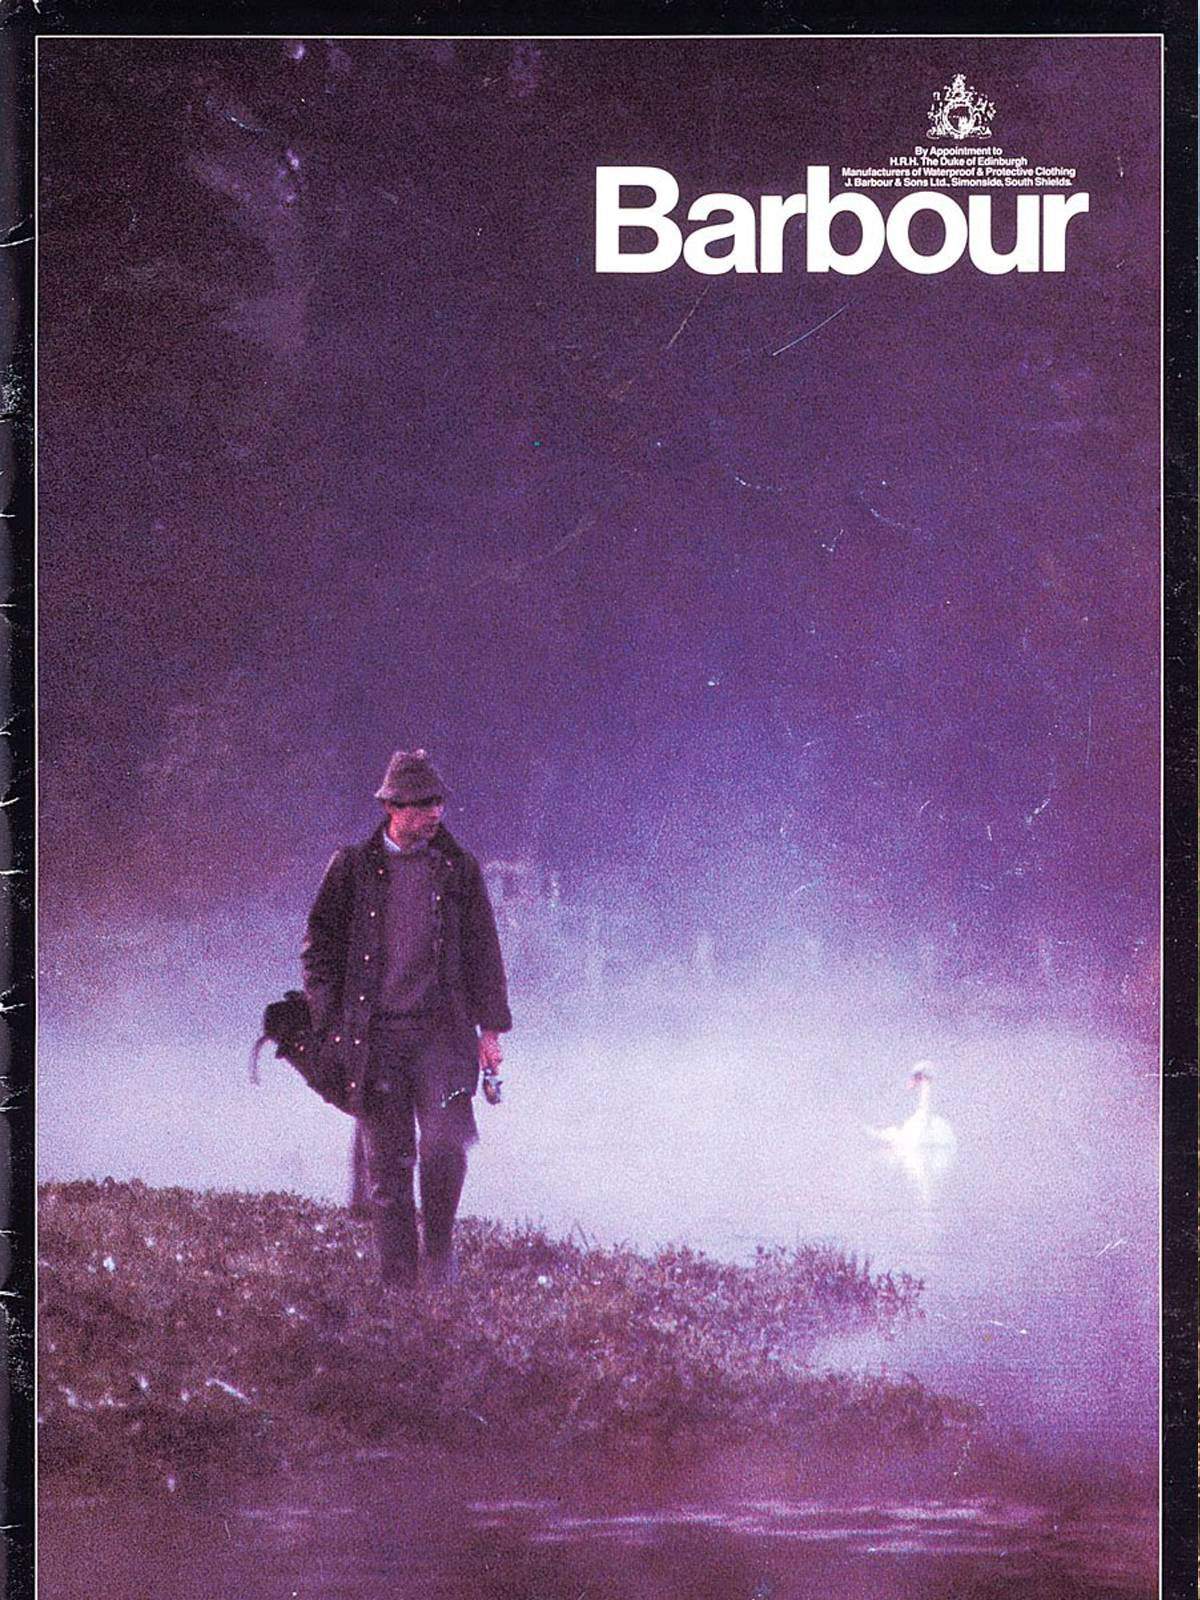 campaign-barbour-old-scan-001.jpg